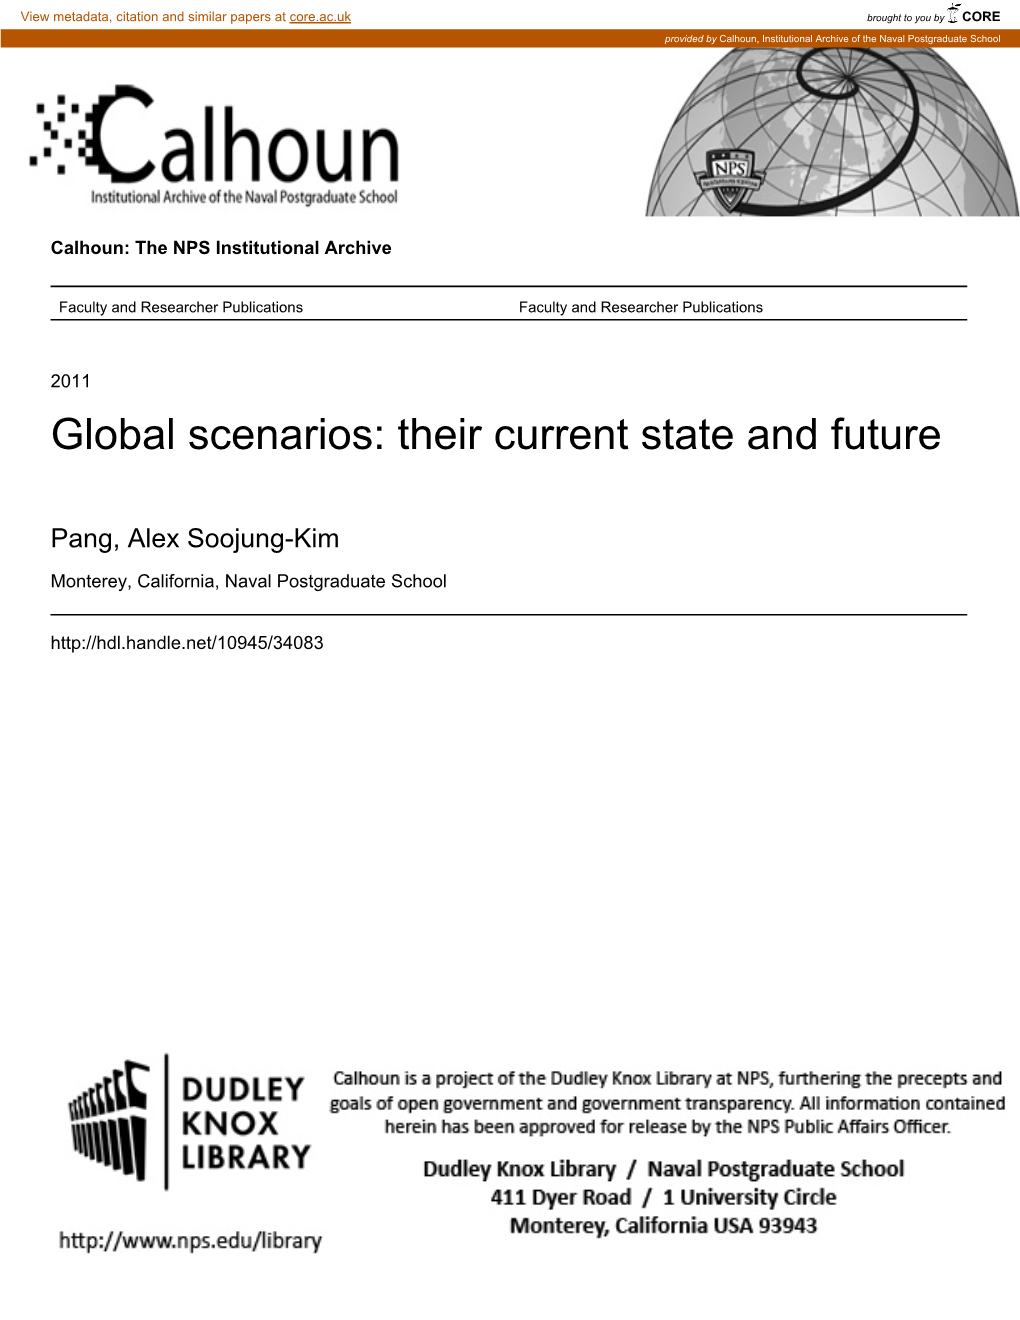 Global Scenarios: Their Current State and Future